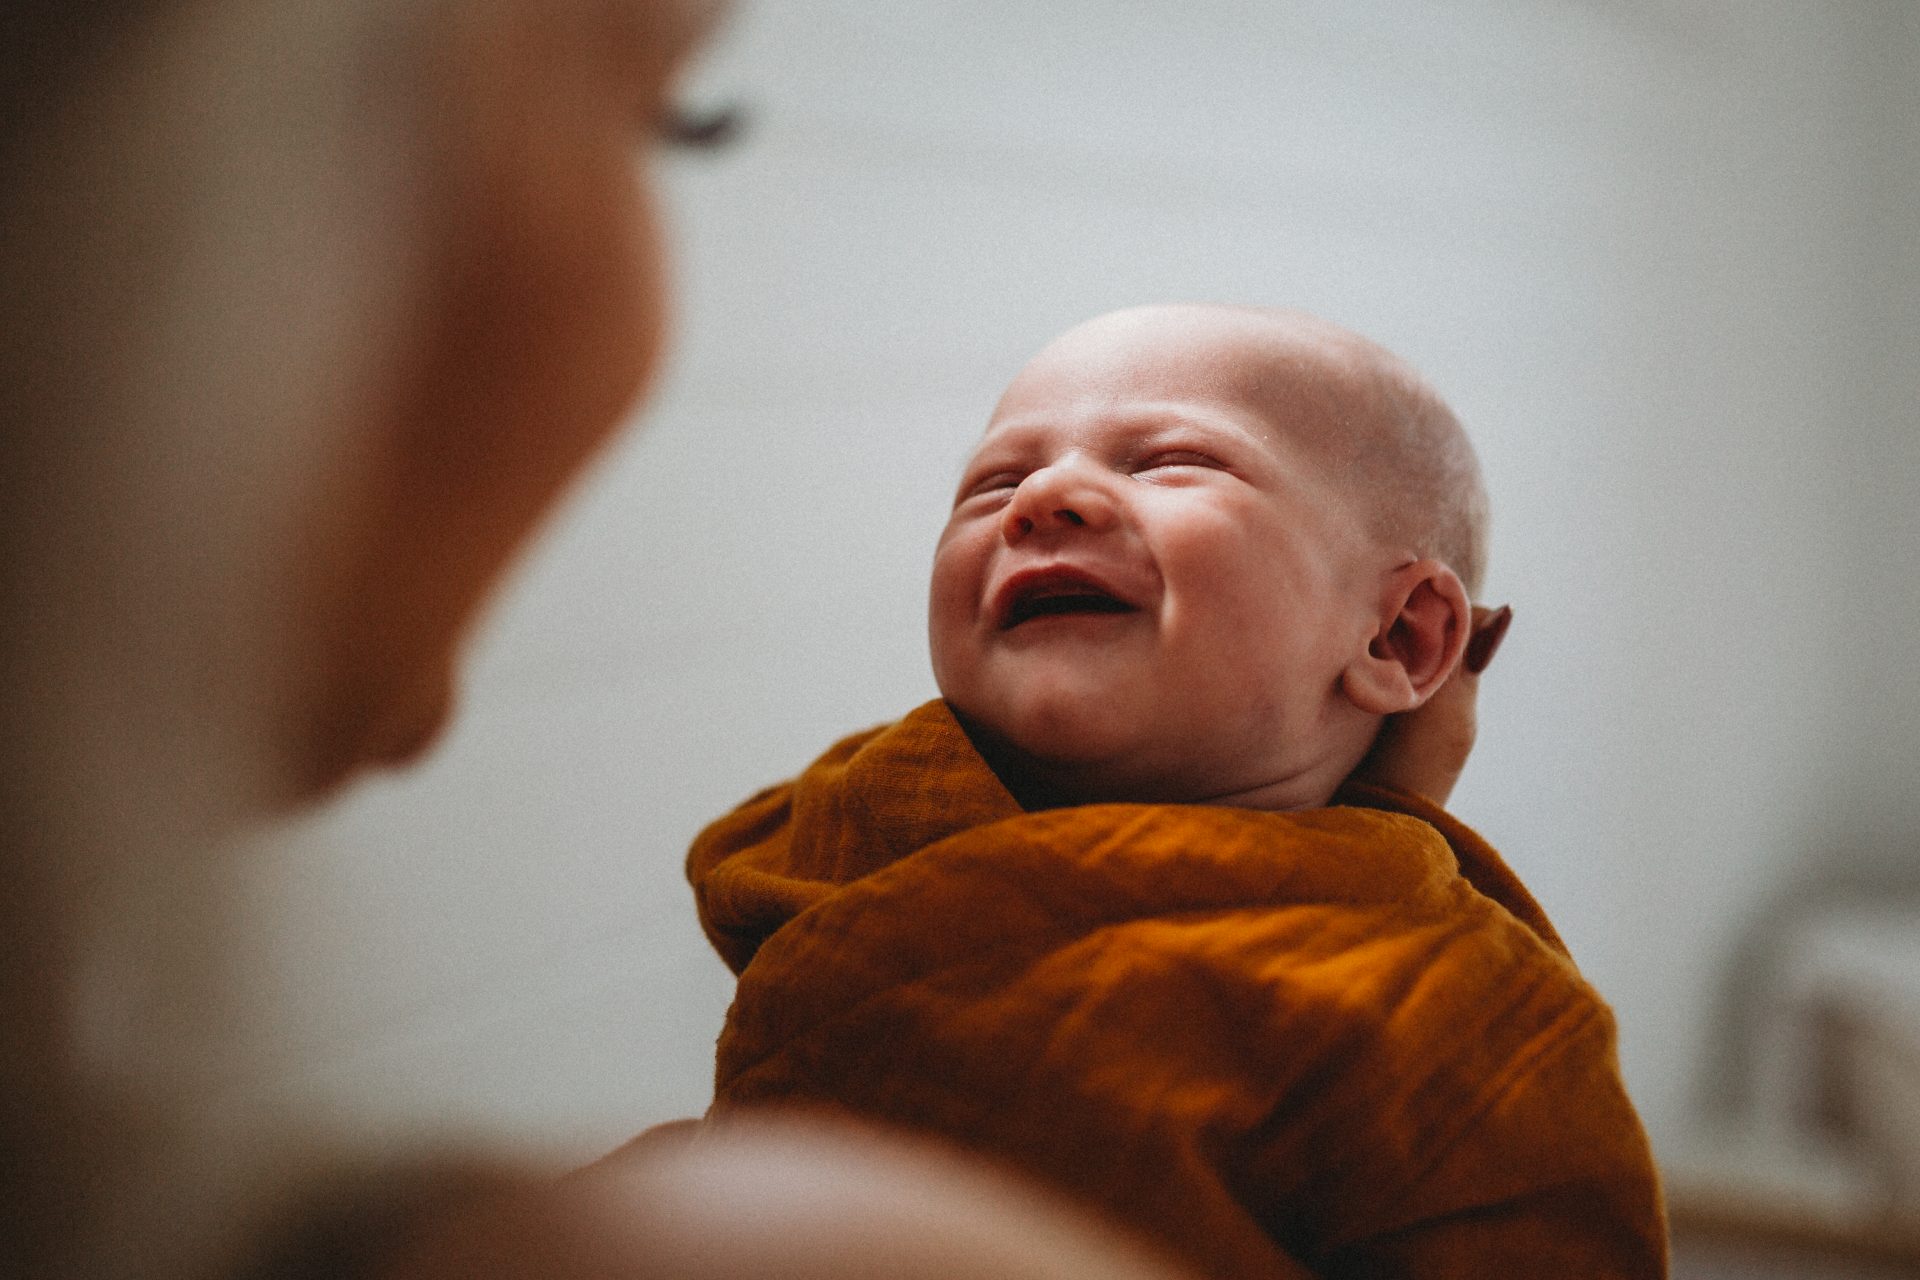 Baby smiling at mother